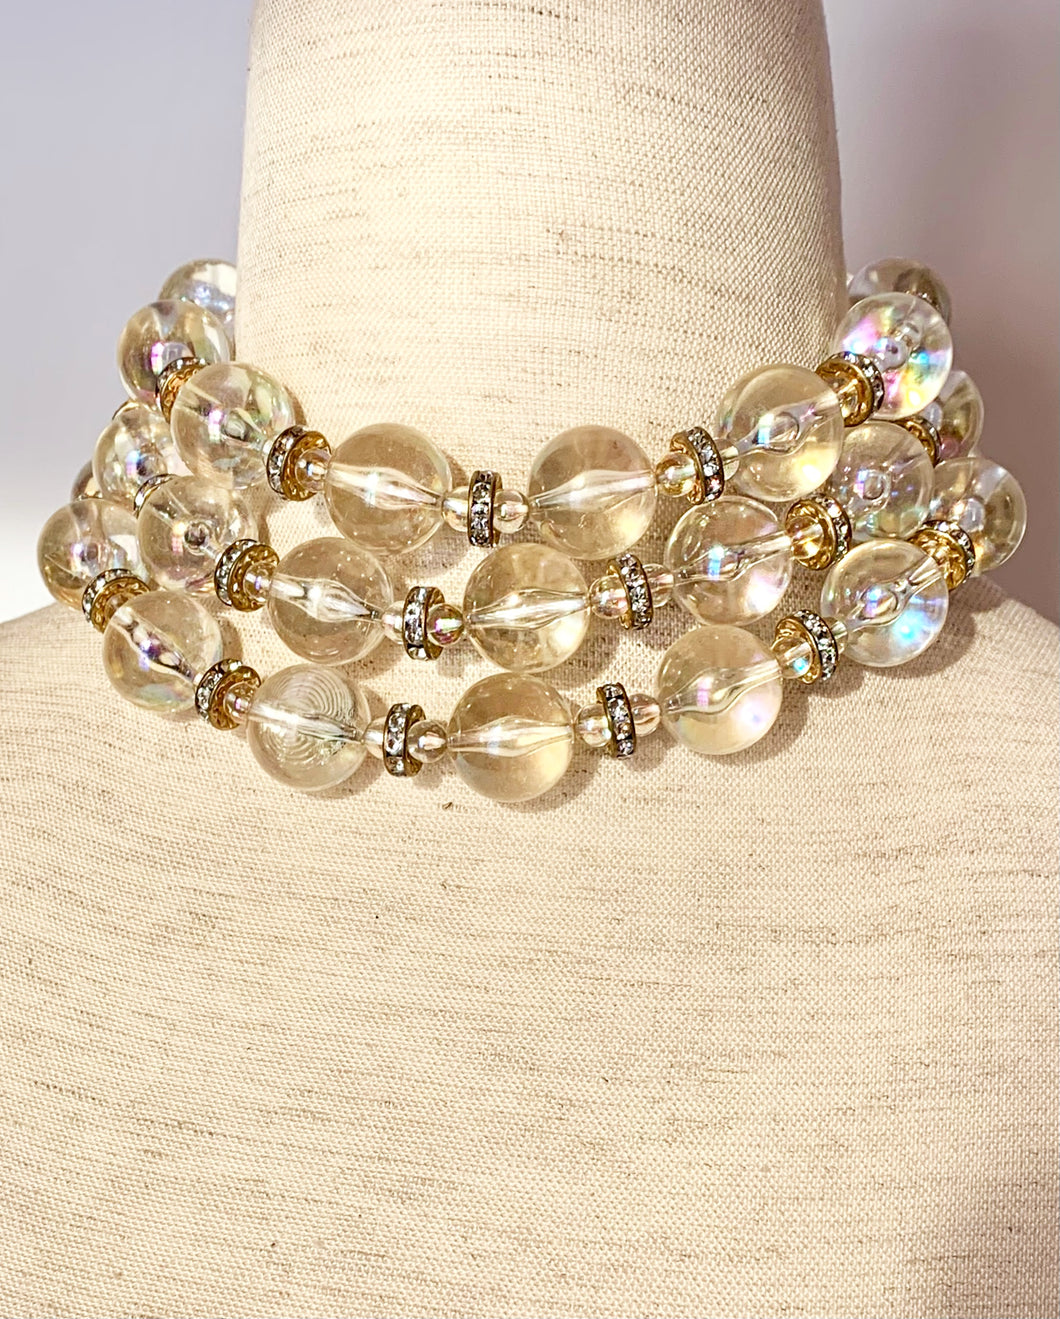 CHANEL VINTAGE HOLOGRAPHIC CRYSTAL RESIN BEAD RUNWAY NECKLACE CHOKER